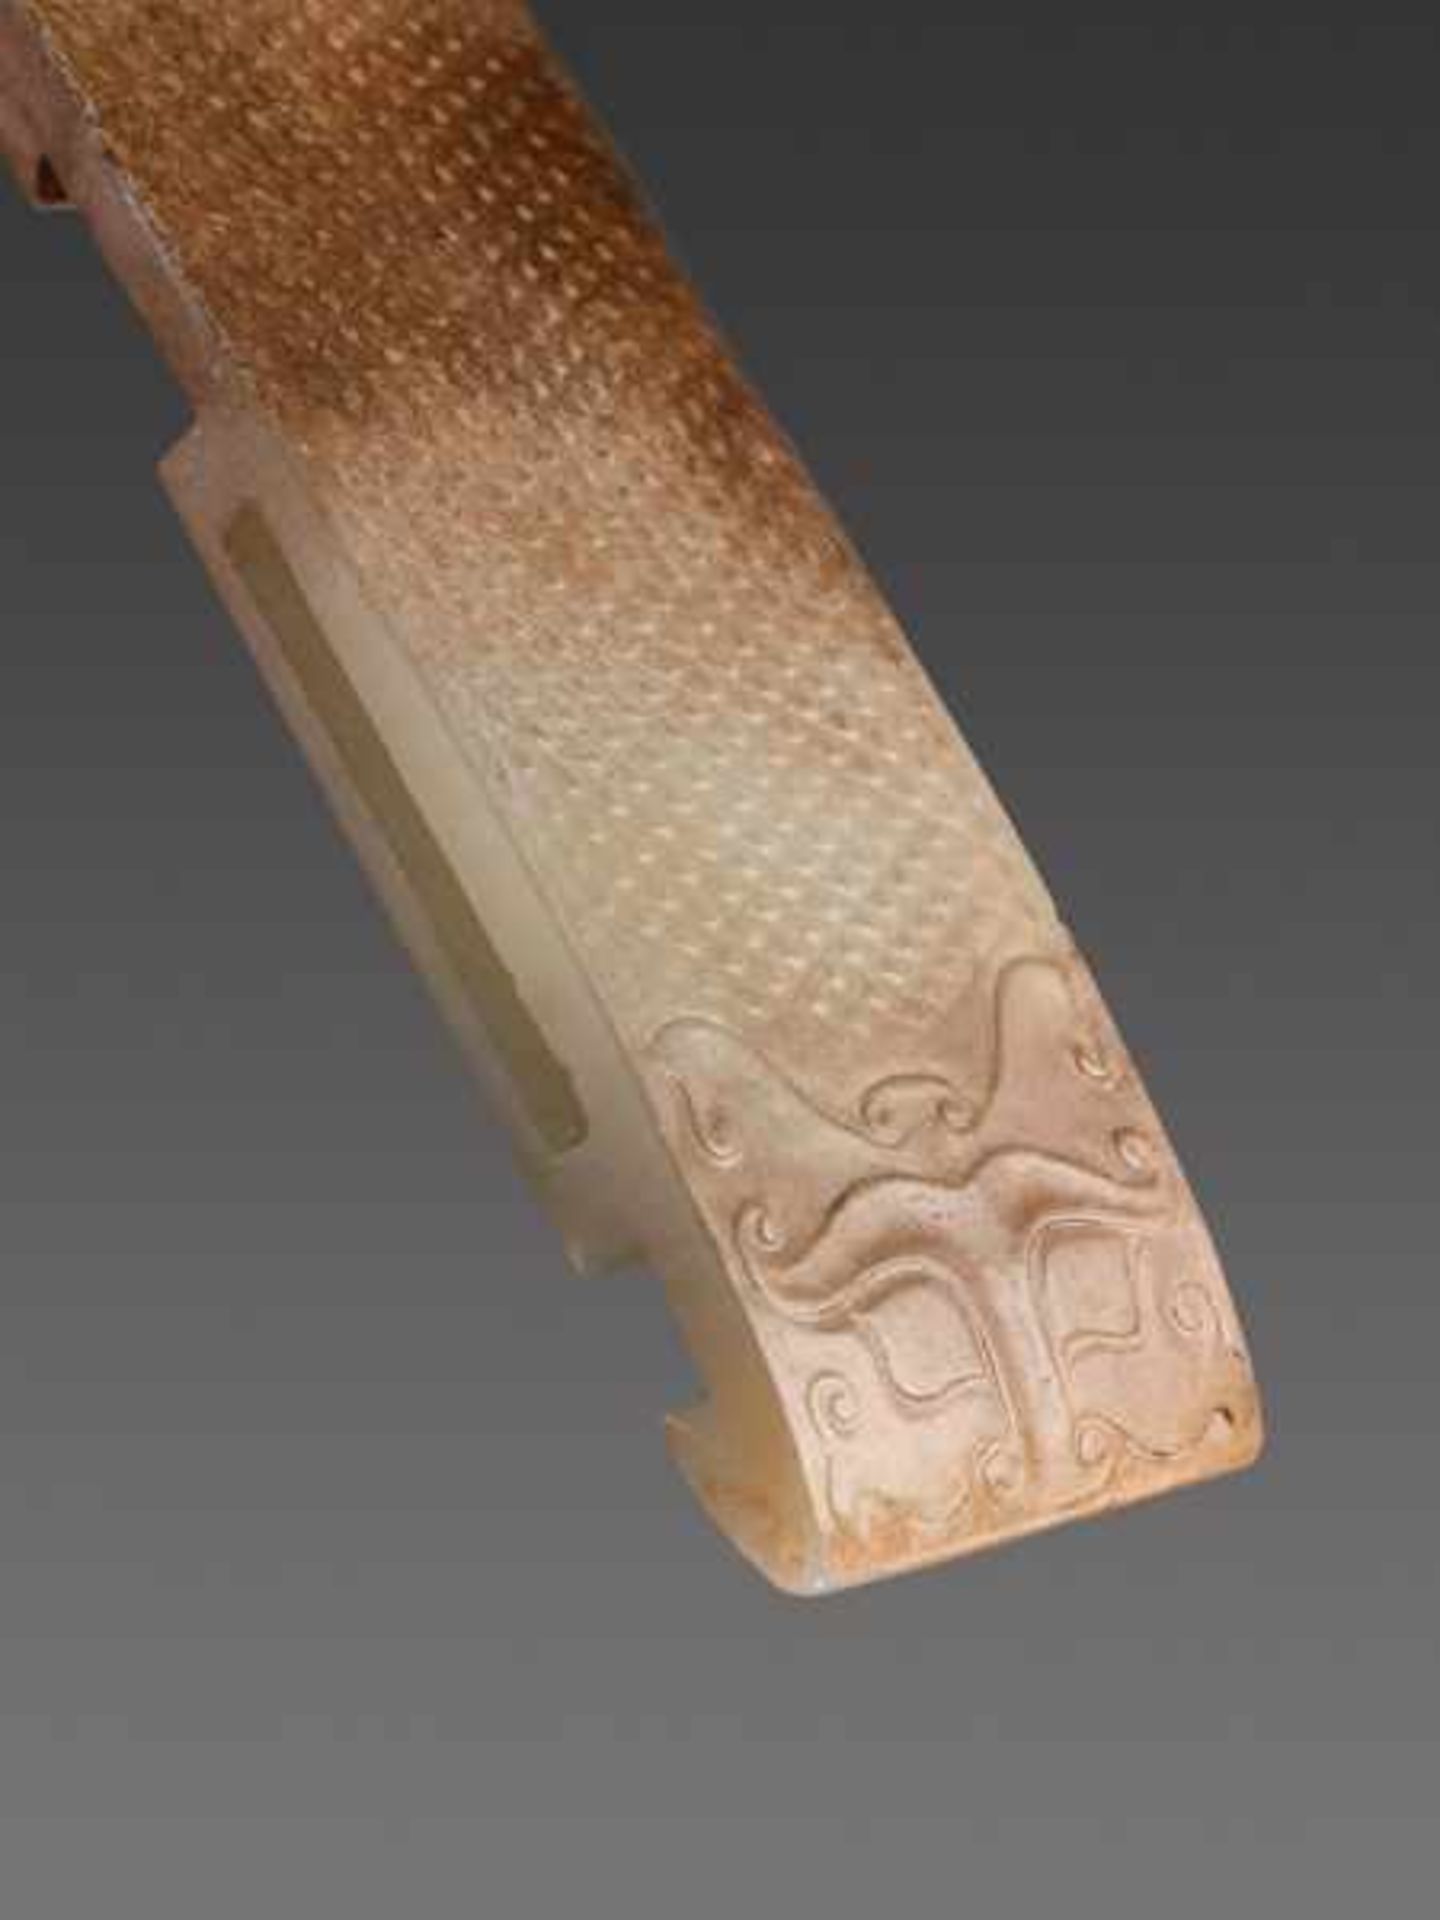 A LARGE SCABBARD SLIDE WITH TAOTIE MASK Jade. China, late Qing period, end of 19th, early 20th - Bild 3 aus 5